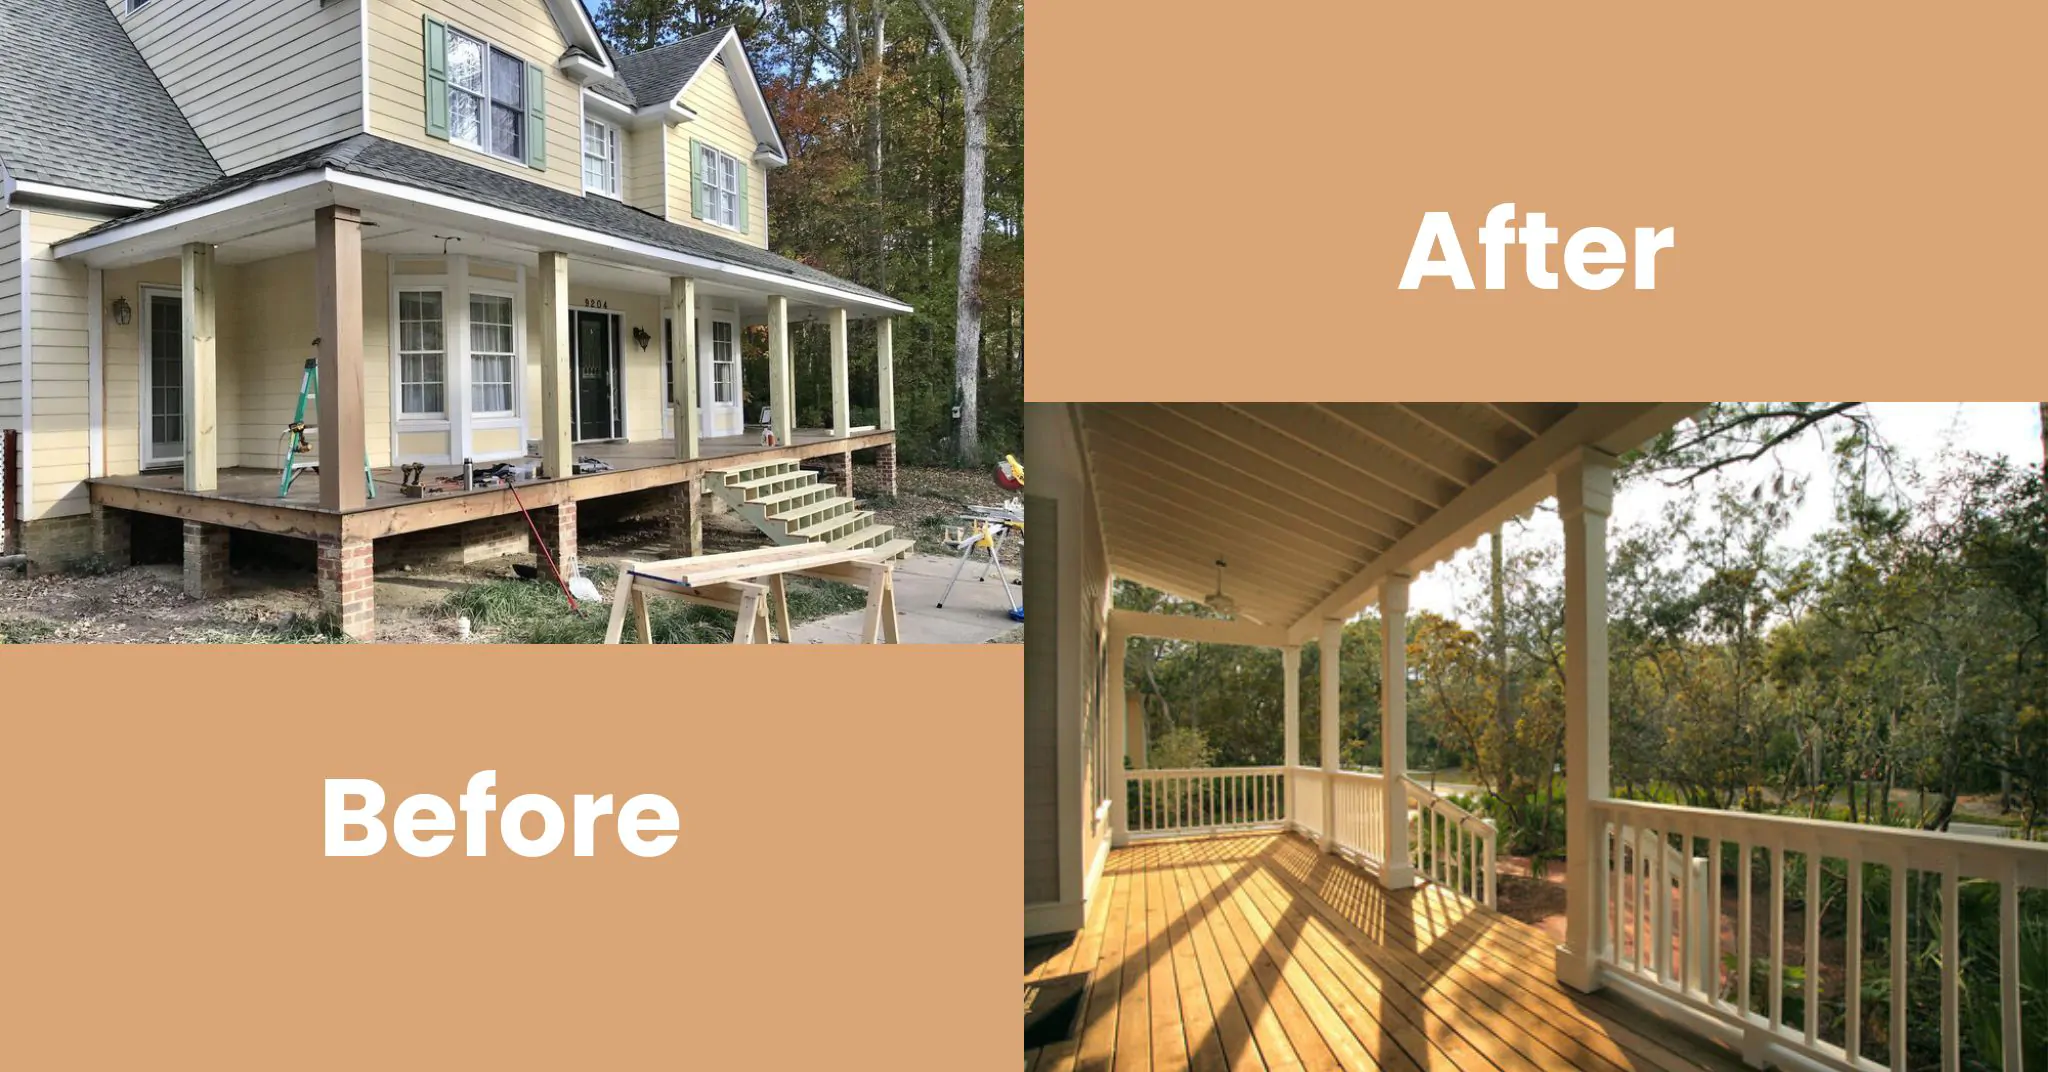 Before and After Porch Installation Service - All Pro Cherry Hill Deck Builders